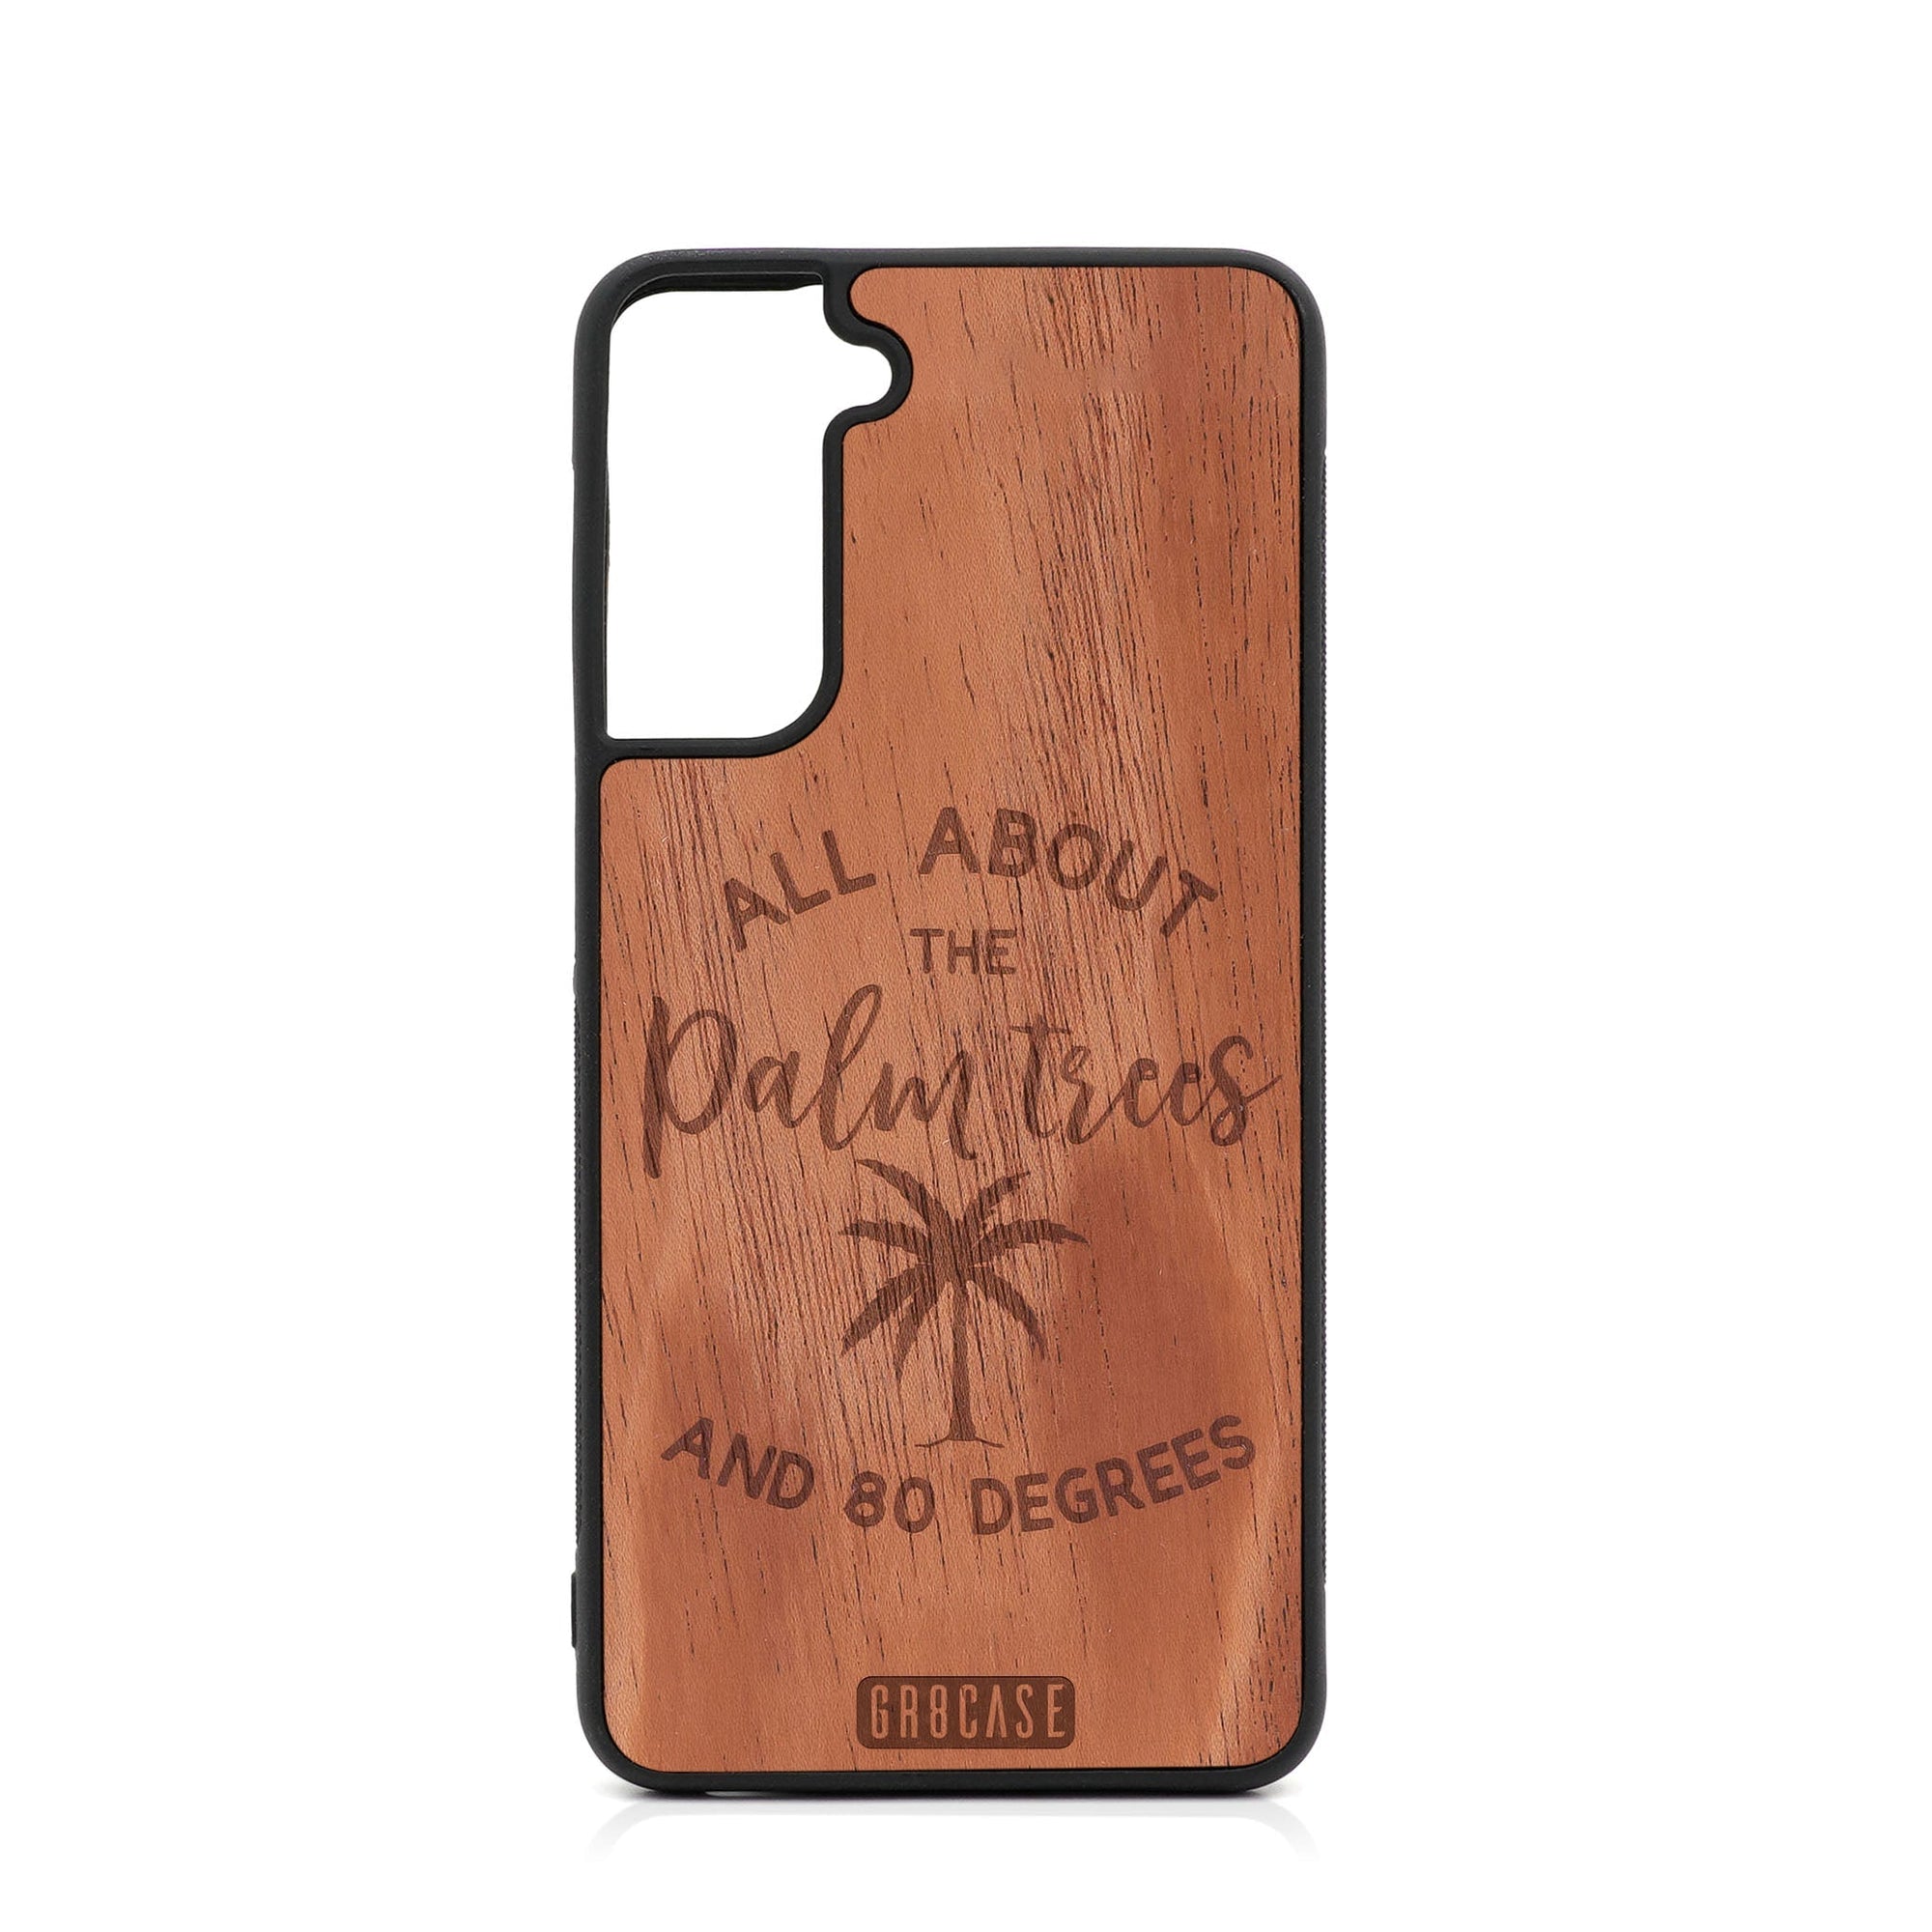 All About The Palm Trees And 80 Degree Design Wood Case For Samsung Galaxy S23 5G